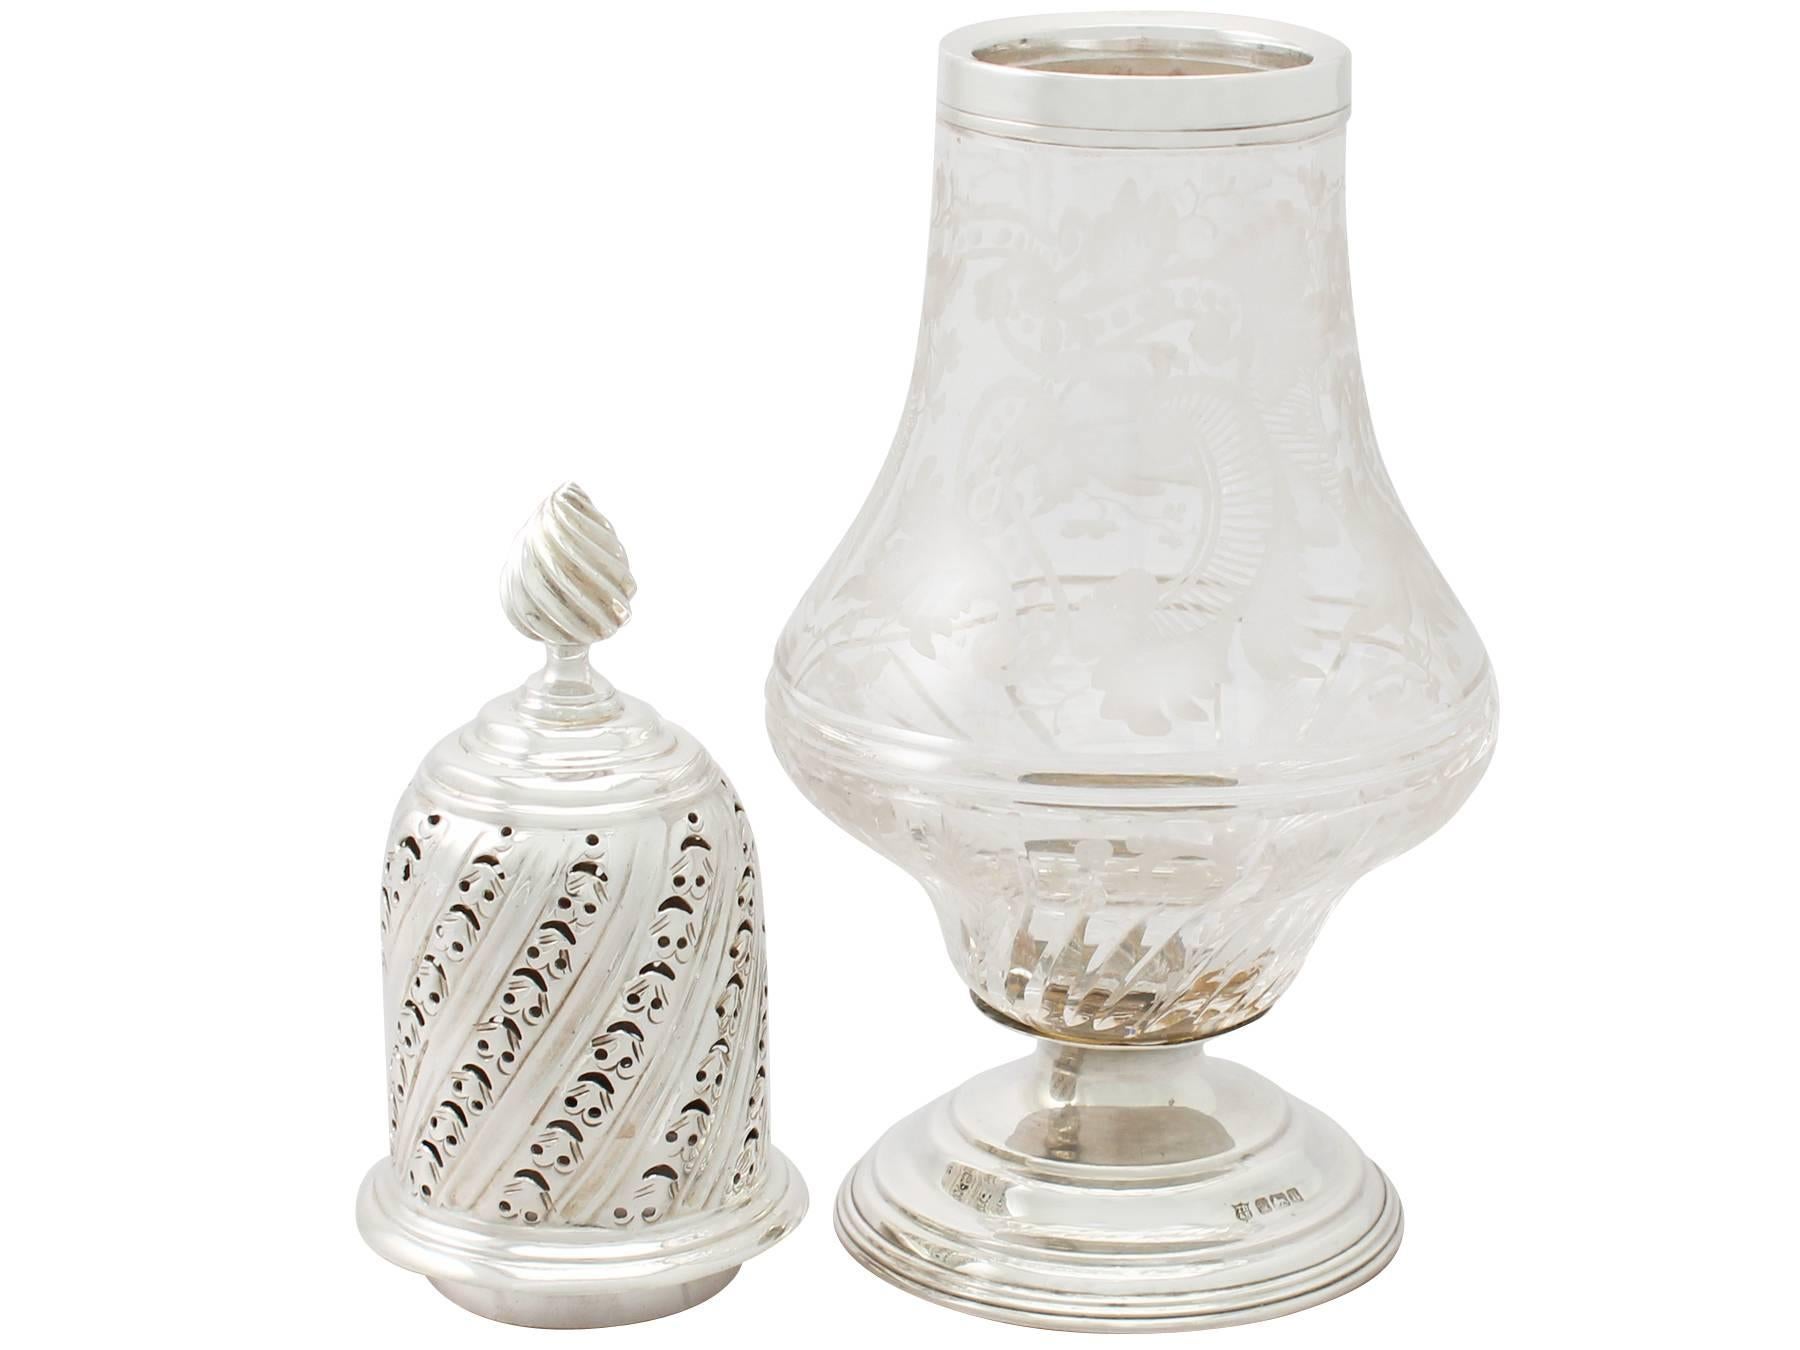 English Antique Edwardian Acid Etched Glass and Sterling Silver Sugar Caster, 1905 For Sale